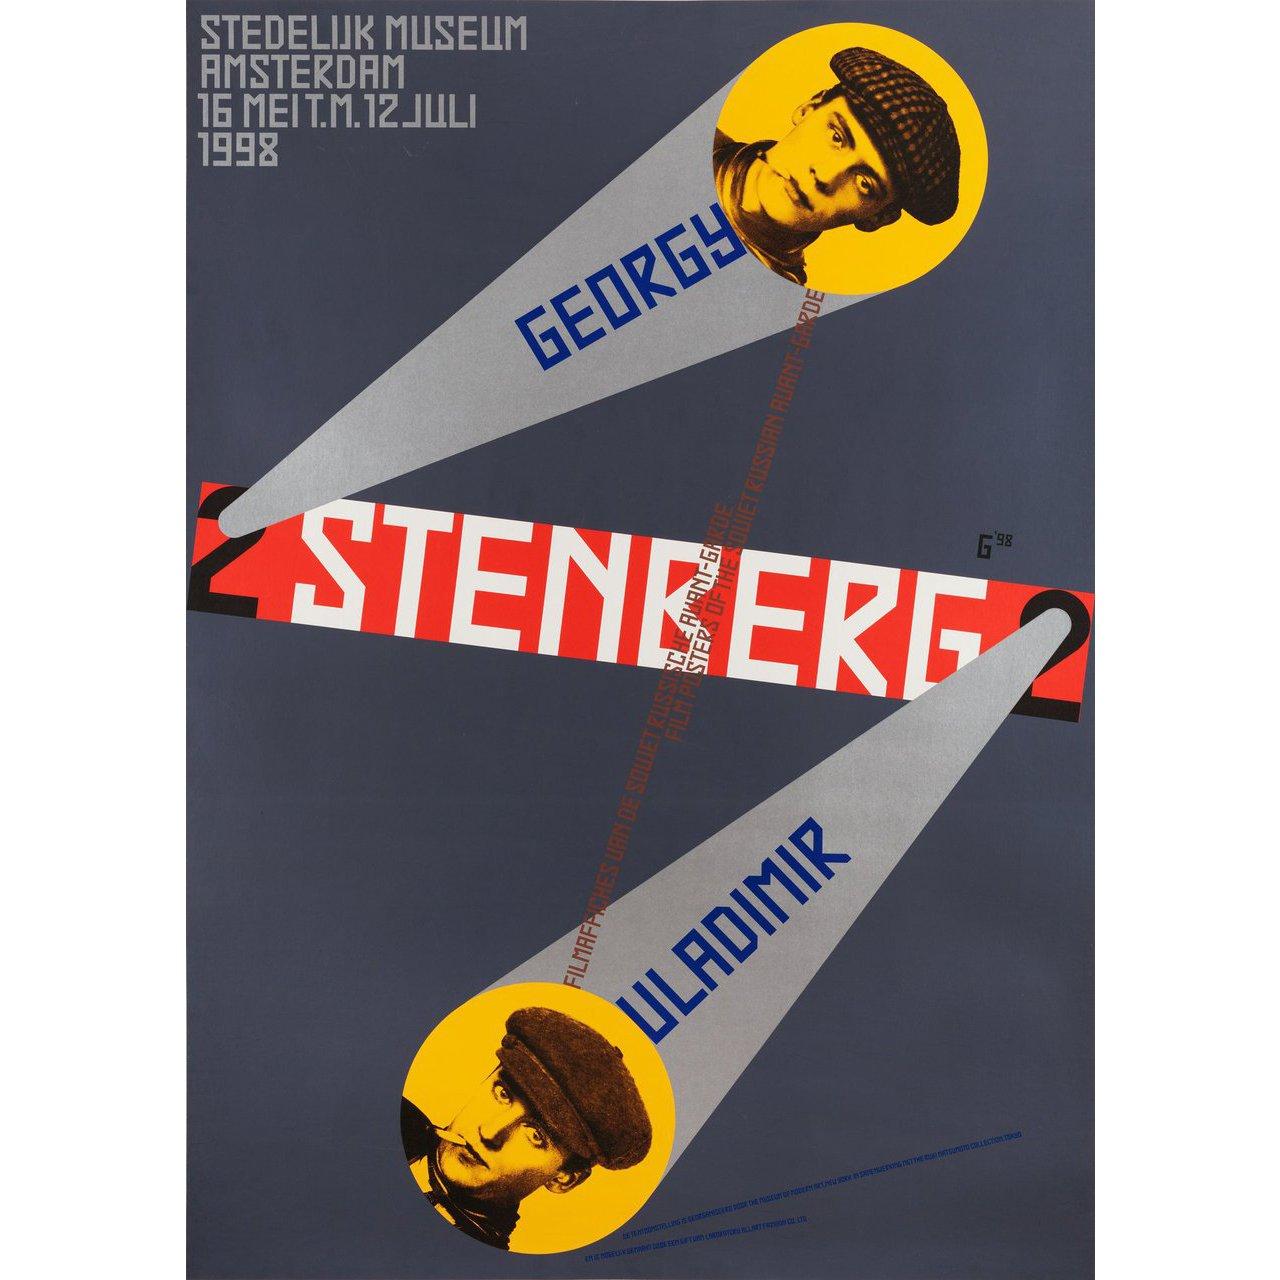 Original 1998 Swiss A0 poster by Gielijn Escher for the film Filmaffiches Van Gregory En Vladamir Stenberg. Fine condition, linen-backed. This poster has been professionally linen-backed. Please note: the size is stated in inches and the actual size